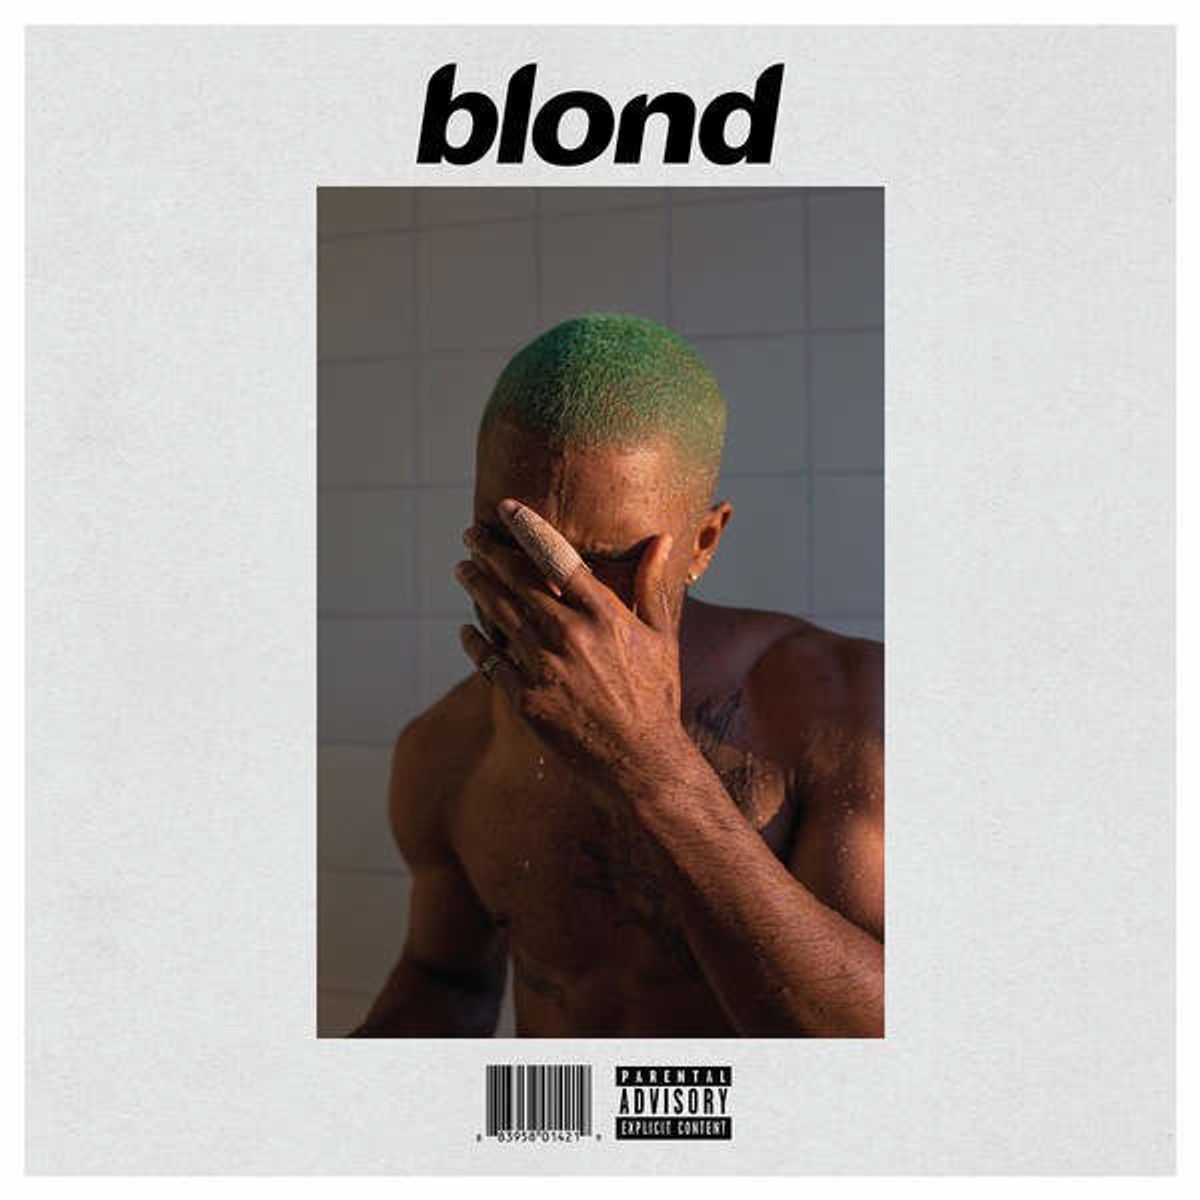 Review: Frank Ocean Returns With "Endless" And "Blonde"